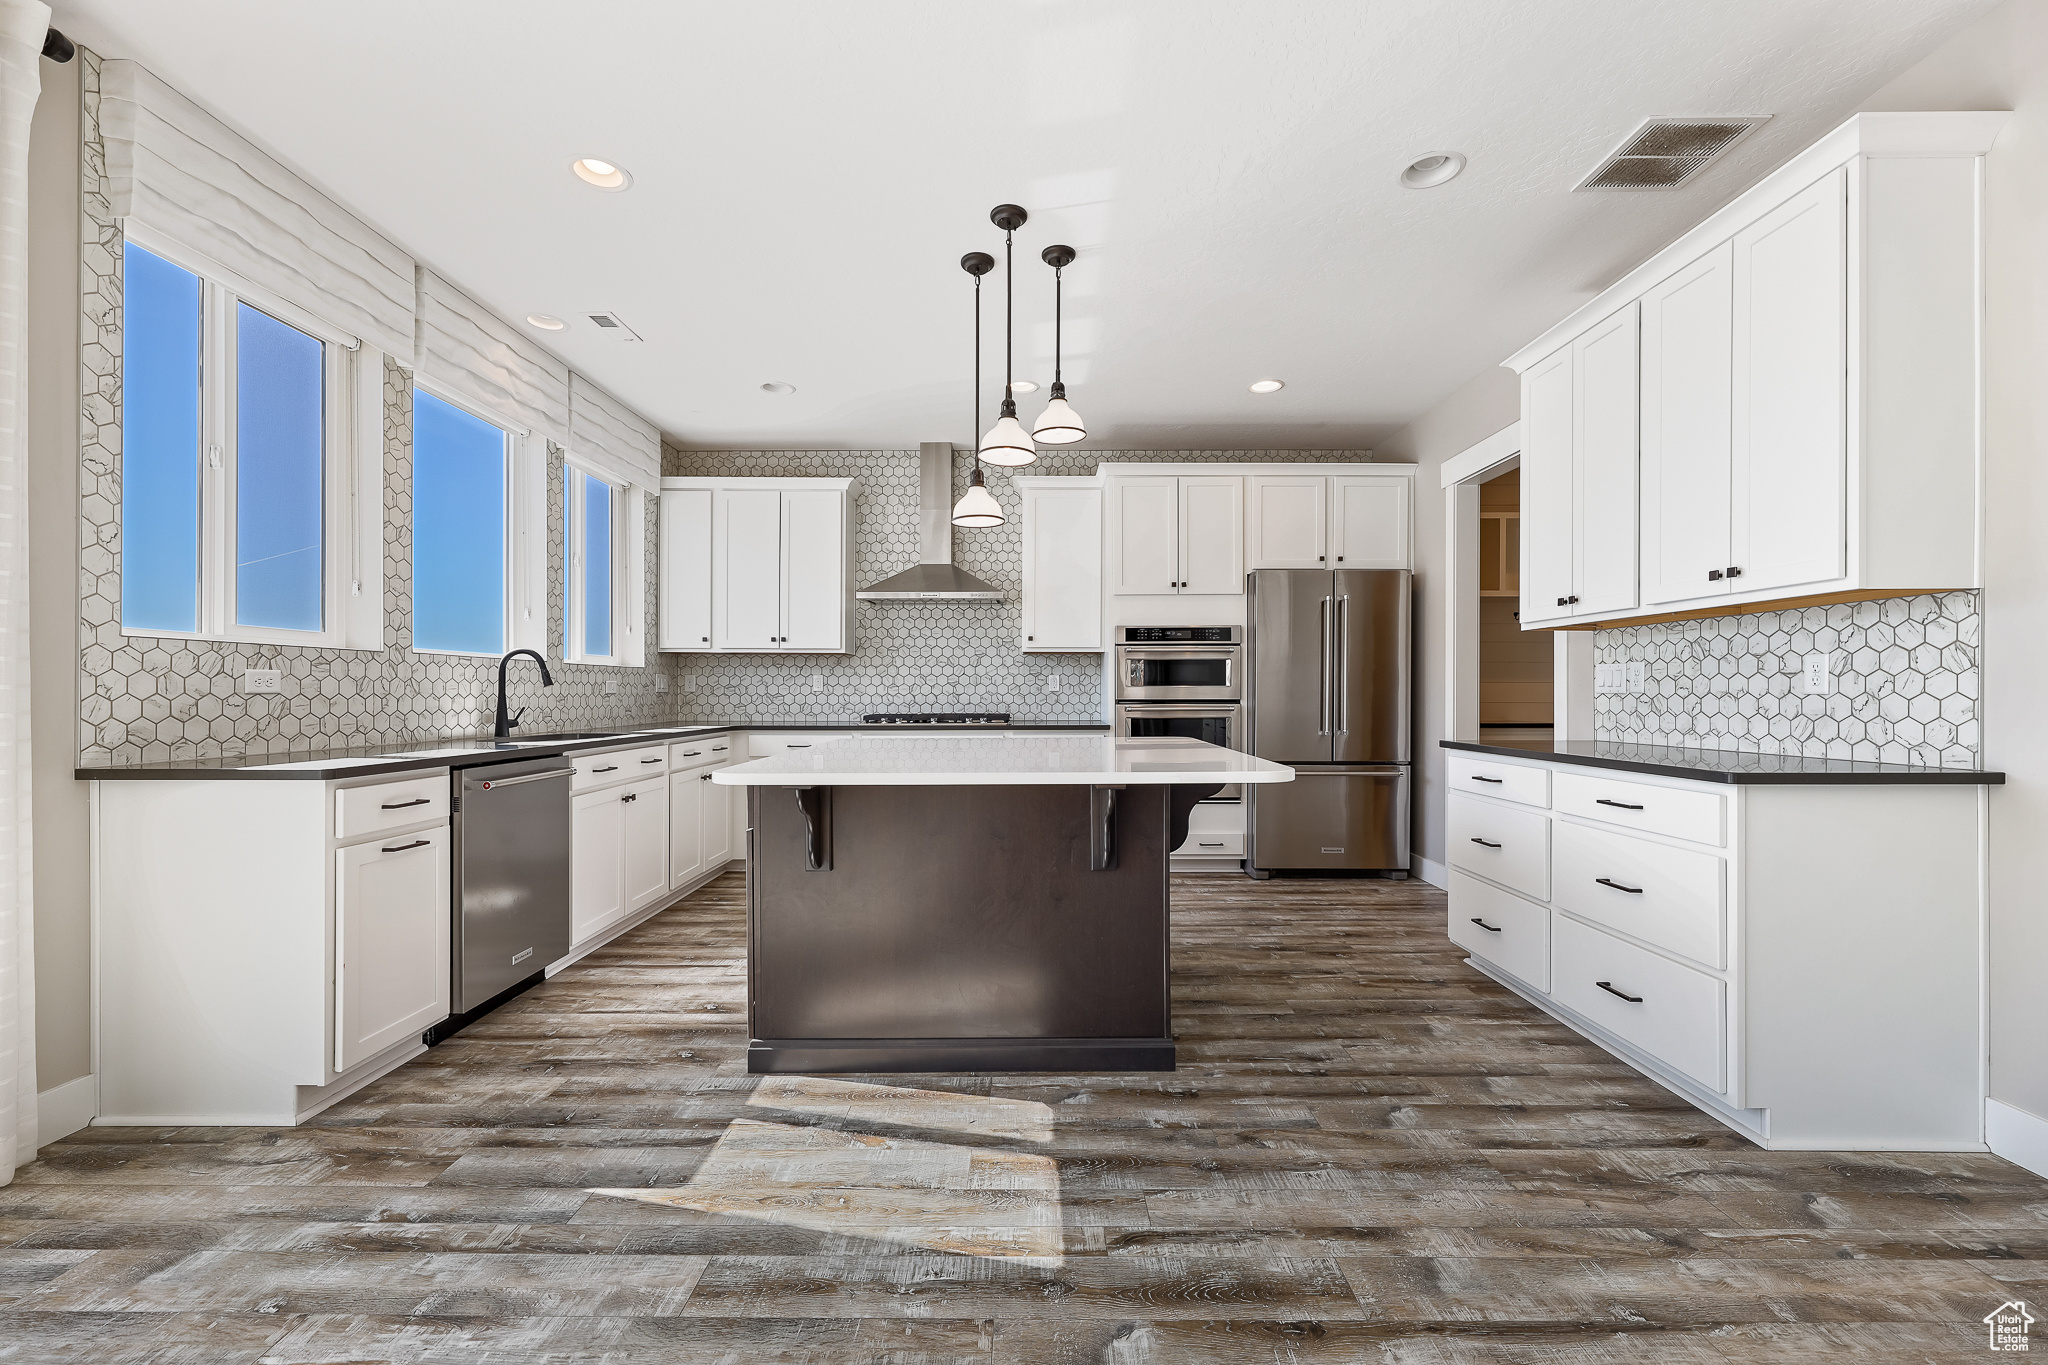 Kitchen with wall chimney range hood, appliances with stainless steel finishes, a kitchen breakfast bar, hanging light fixtures, and a center island